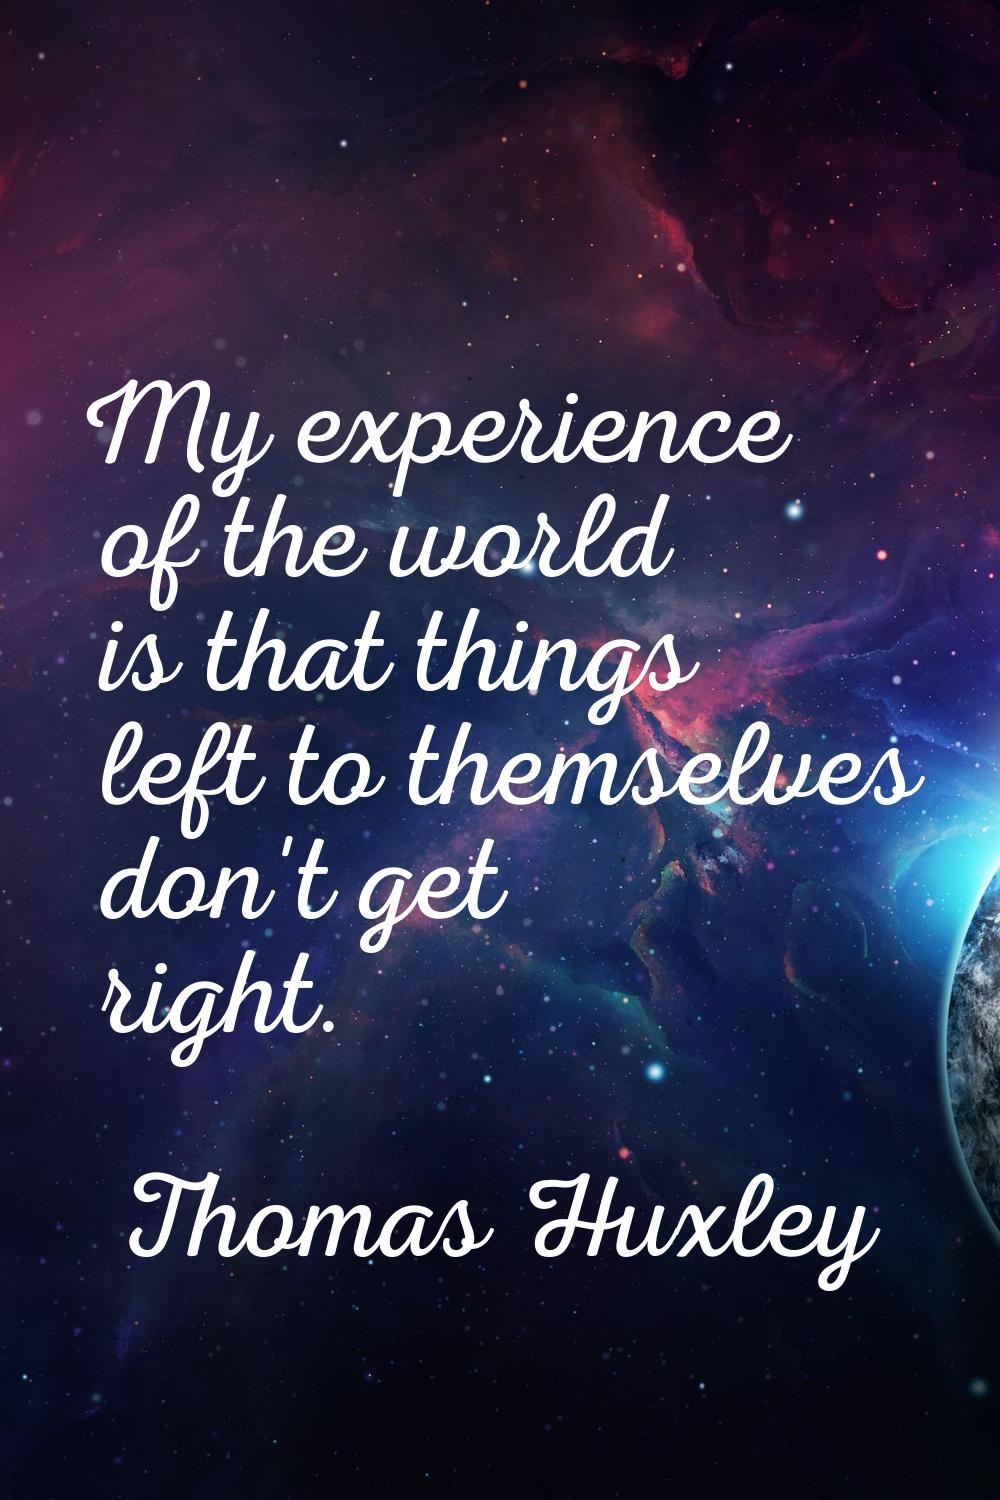 My experience of the world is that things left to themselves don't get right.